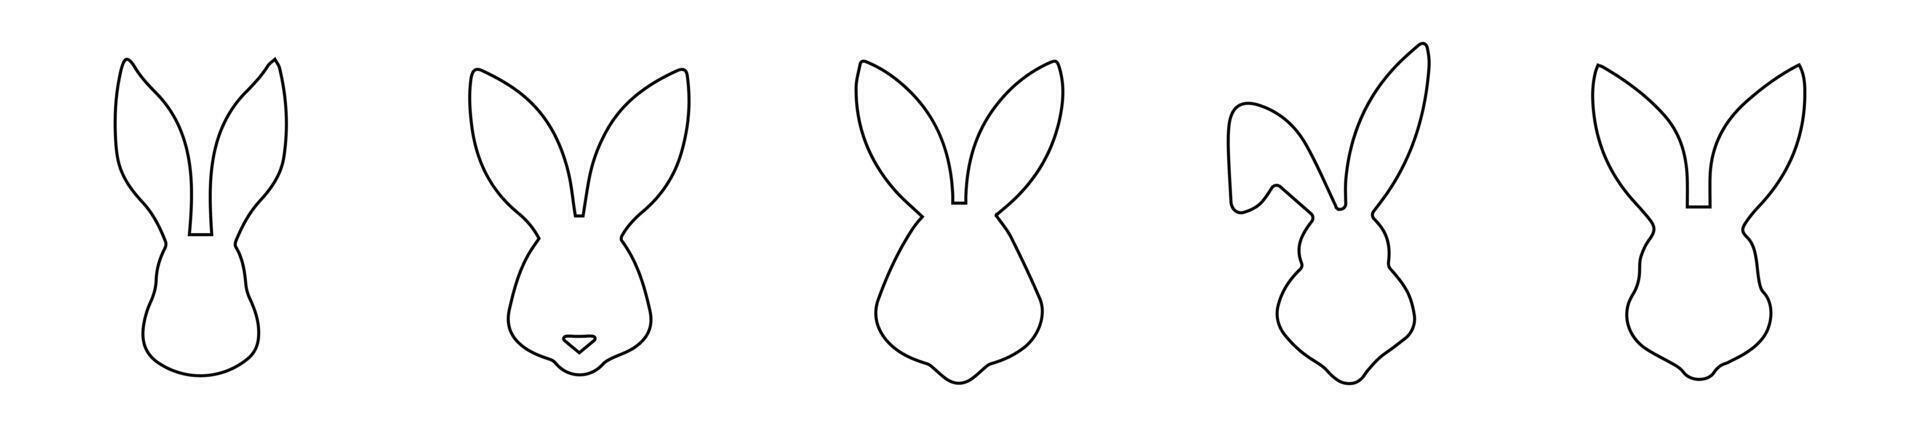 Set of rabbit heads in outline. Easter Bunnies. Isolated on white background. A simple black icons of hares. Cute animals. Ideal for logo, emblem, pictogram, print, design element for greeting card. vector